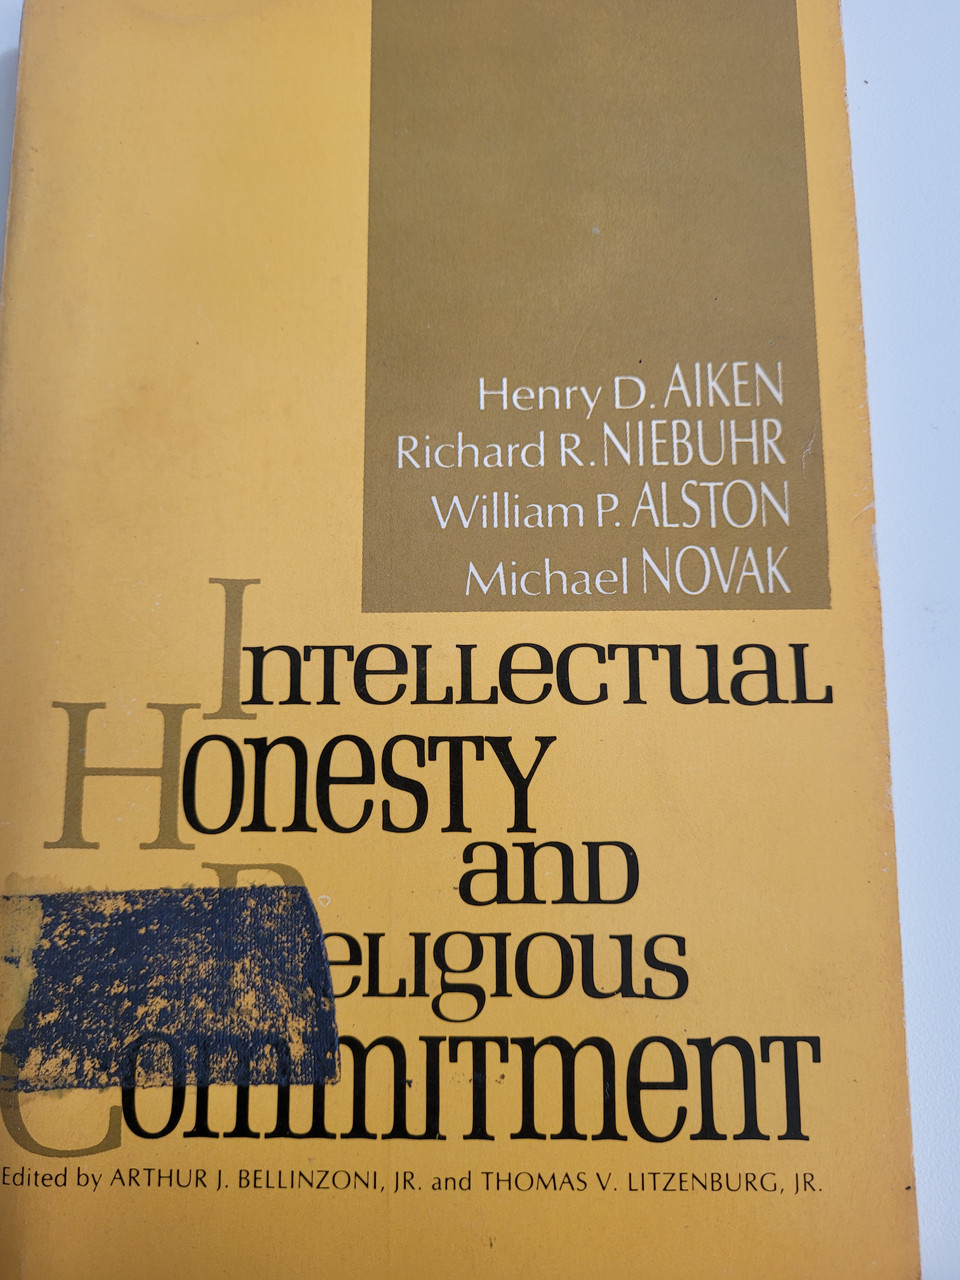 Intellectual Honesty and Religious Commitment by Aiken, Niebuhr, Alston, Novak